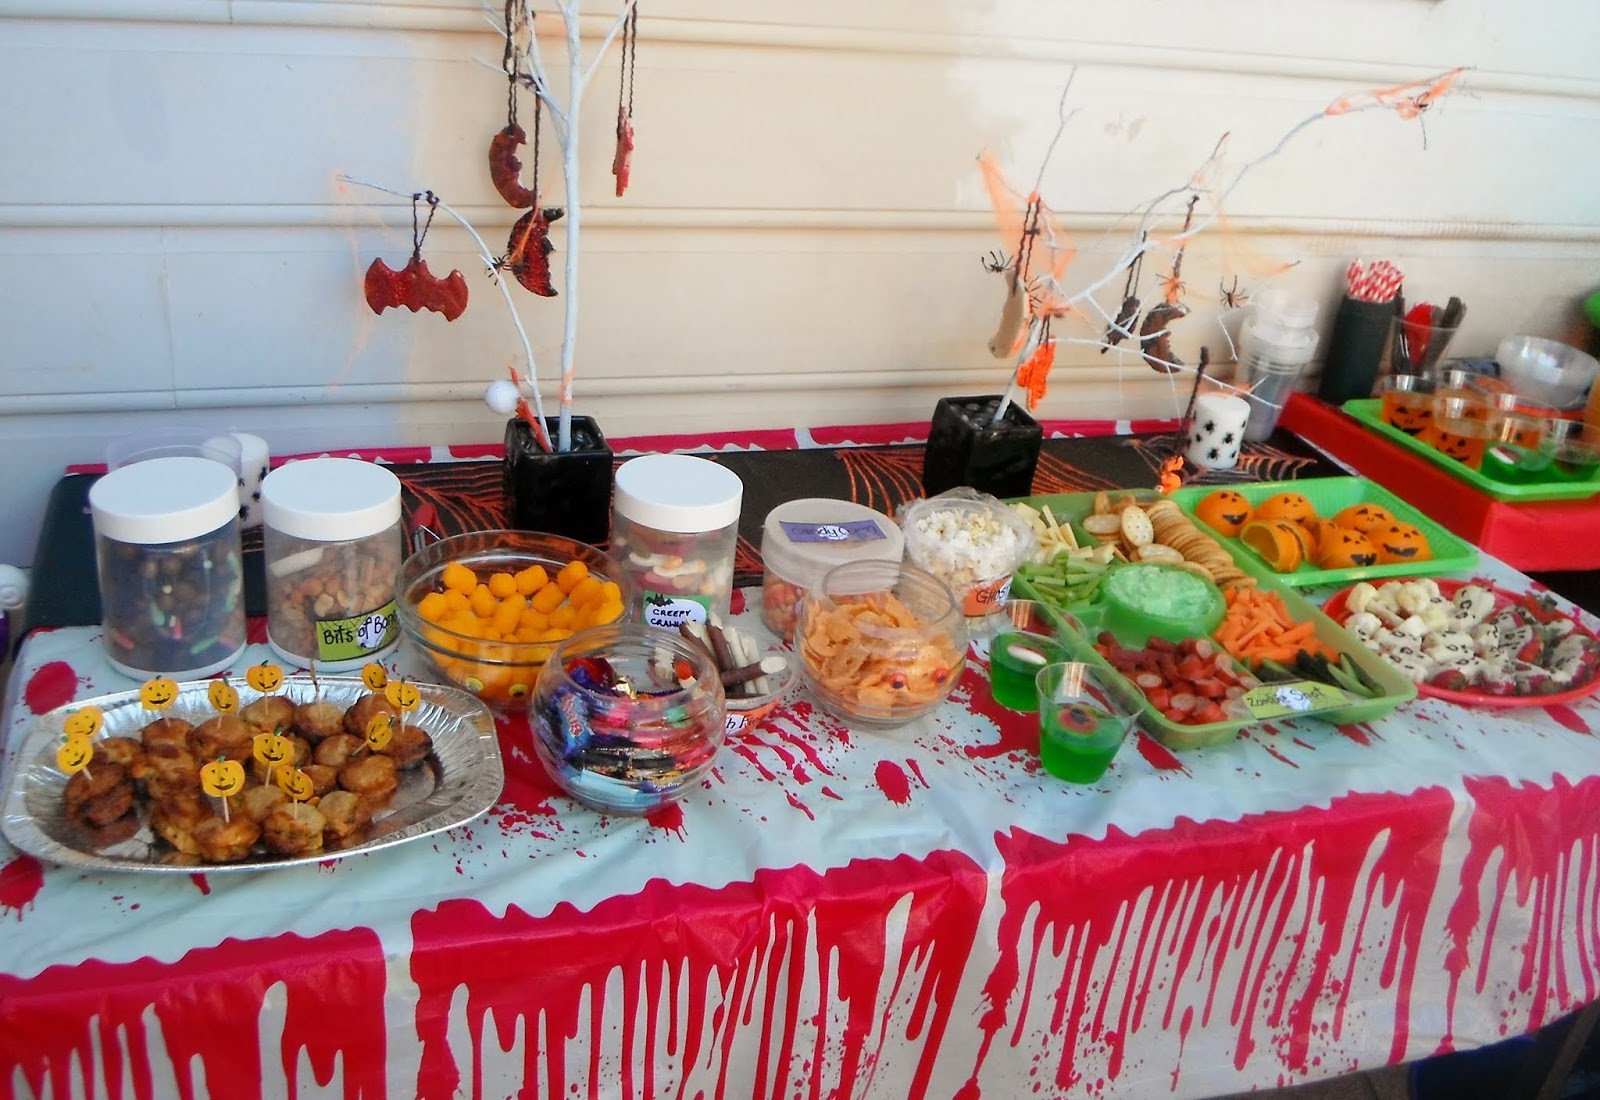 Halloween Party Kids Ideas
 Adventures at home with Mum Halloween Party Food